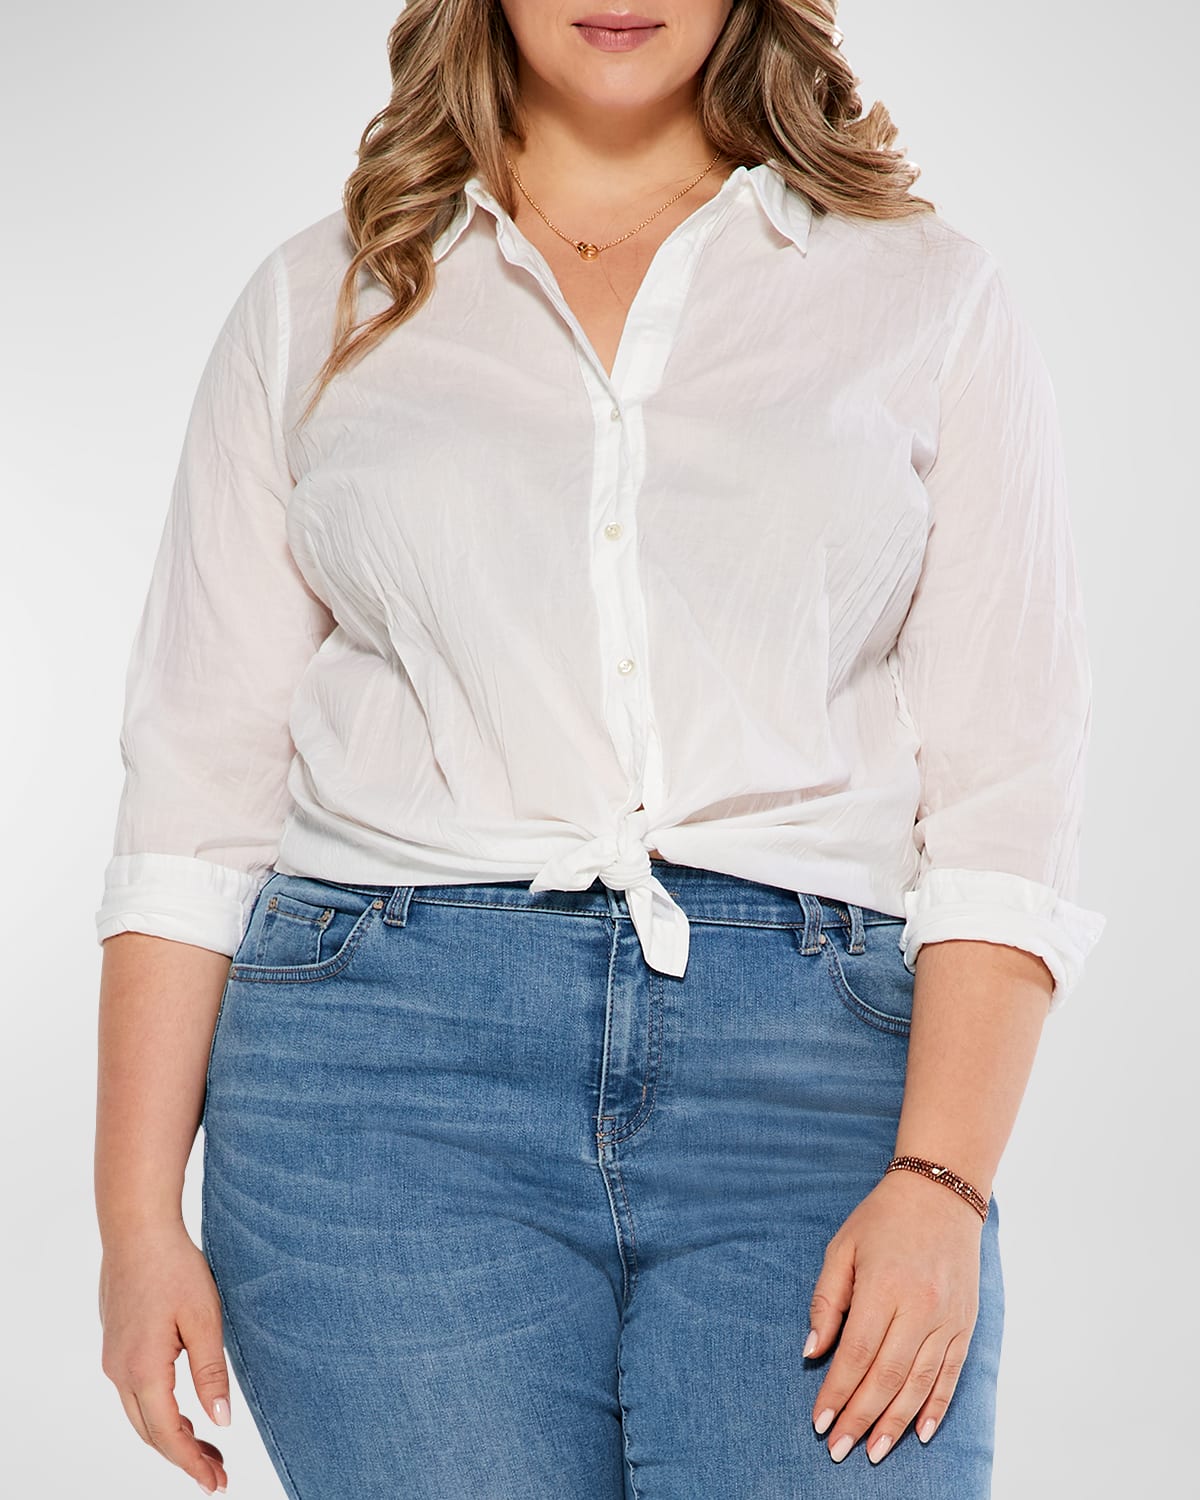 Nic+zoe Plus Plus Size Crinkled Button-down Shirt In Paper White